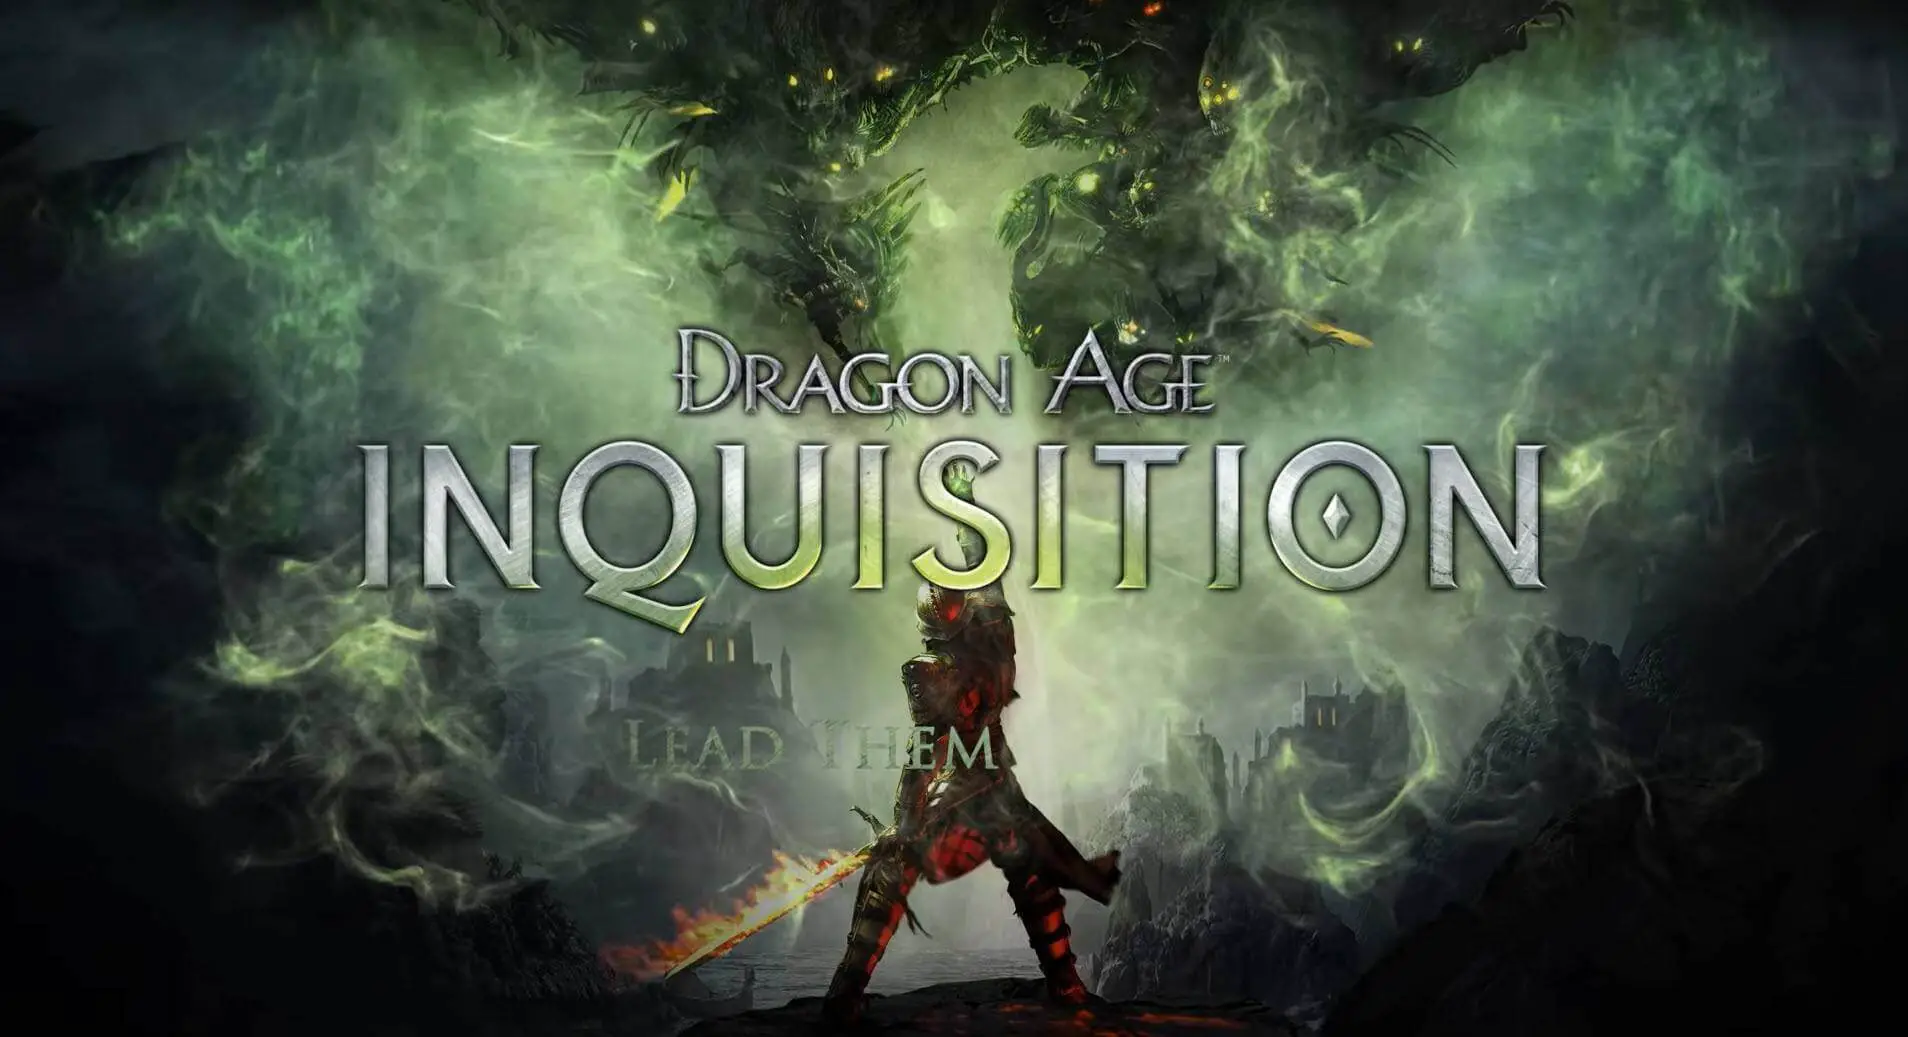 Dragon Age: Inquisition Won’t Launch in Windows